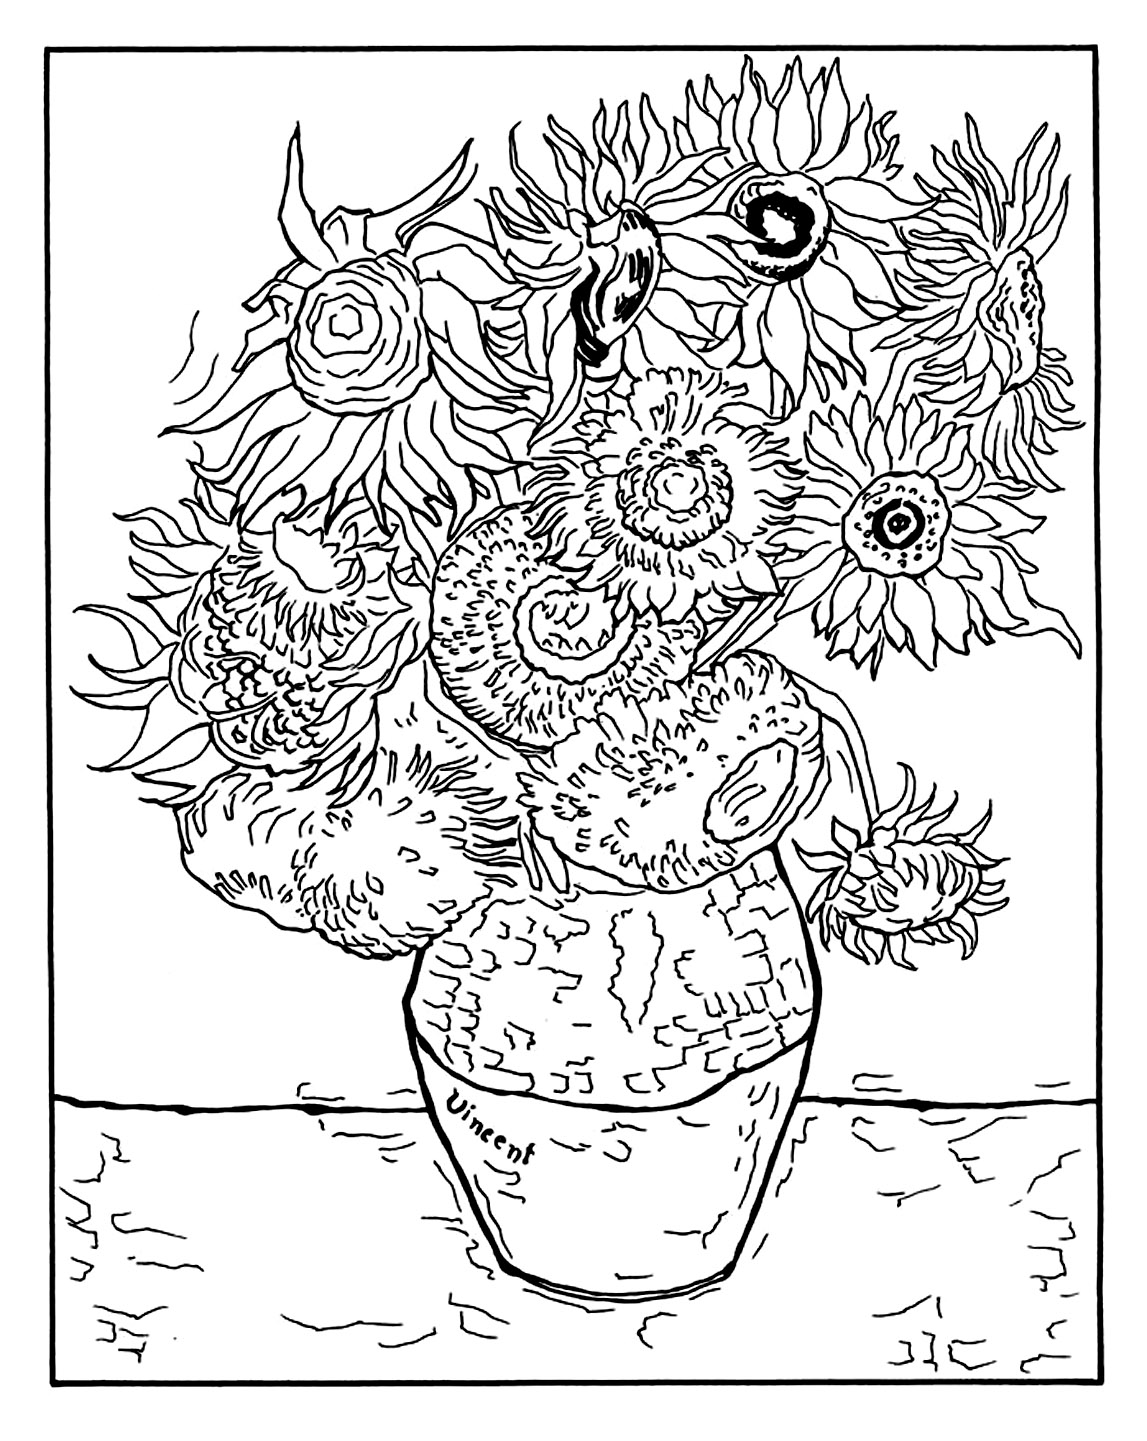 van gogh for coloring pages